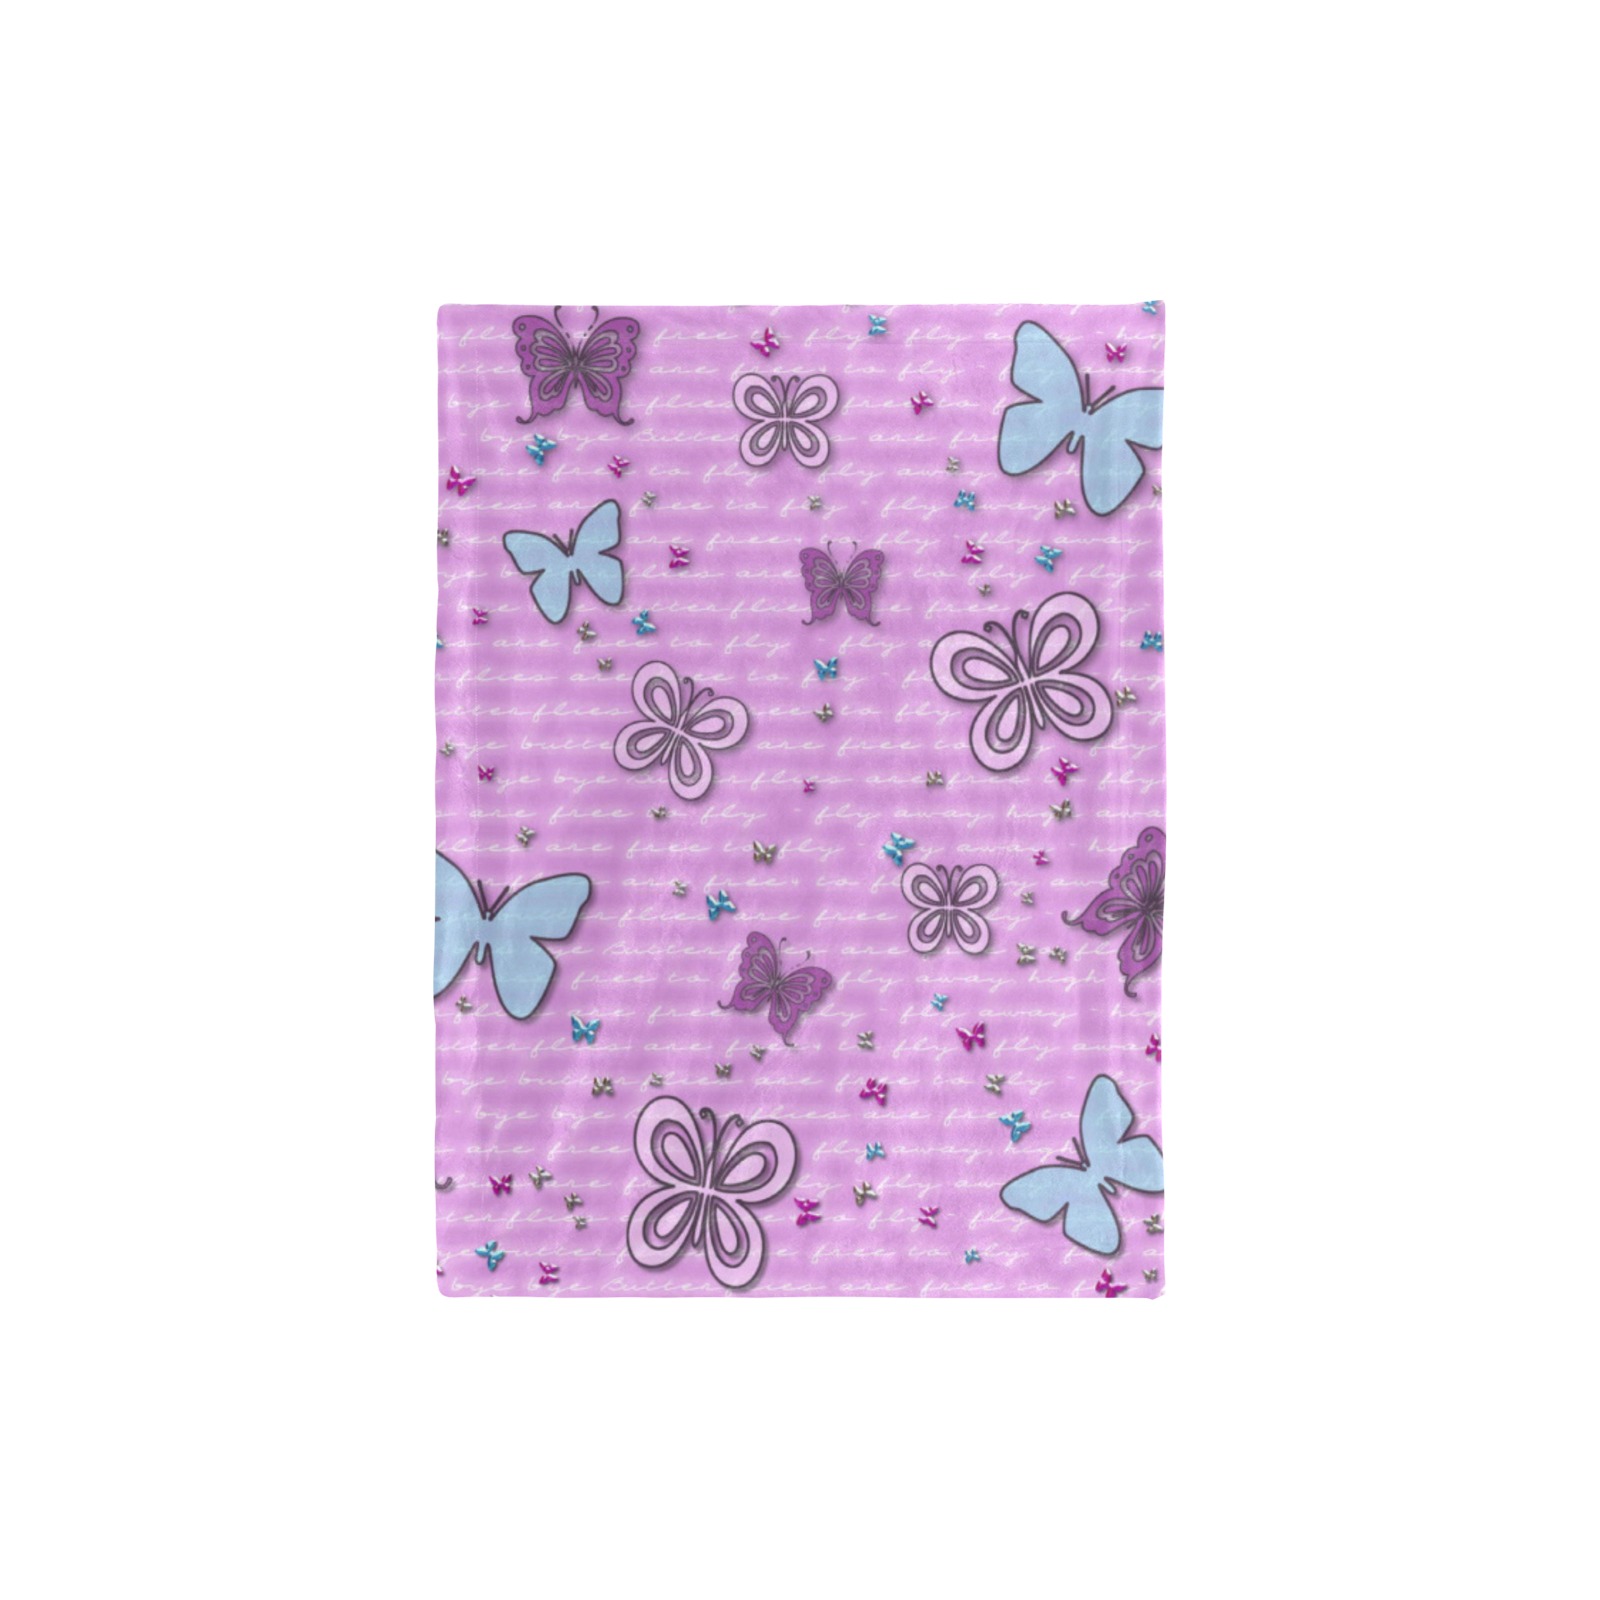 flutterbies-are-free-to-fly Baby Blanket 30"x40"